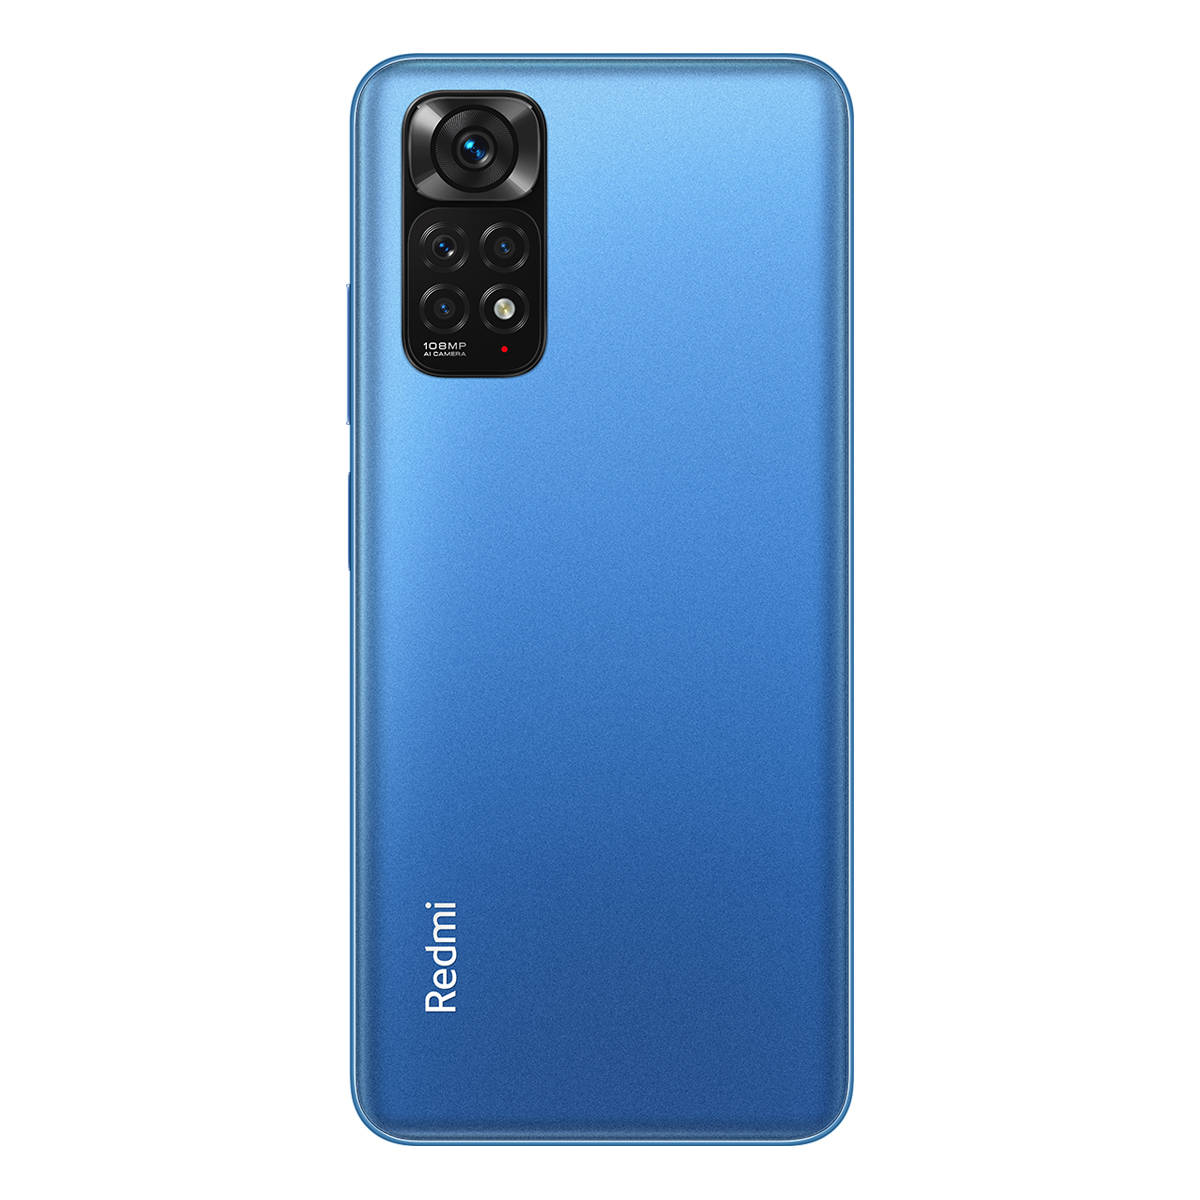 Find Xiaomi Redmi Note 11S Global Version Helio G96 108MP Quad Camera 33W Pro Fast Charge 64GB 128GB 6 43 inch 90Hz AMOLED Octa Core 4G Smartphone for Sale on Gipsybee.com with cryptocurrencies